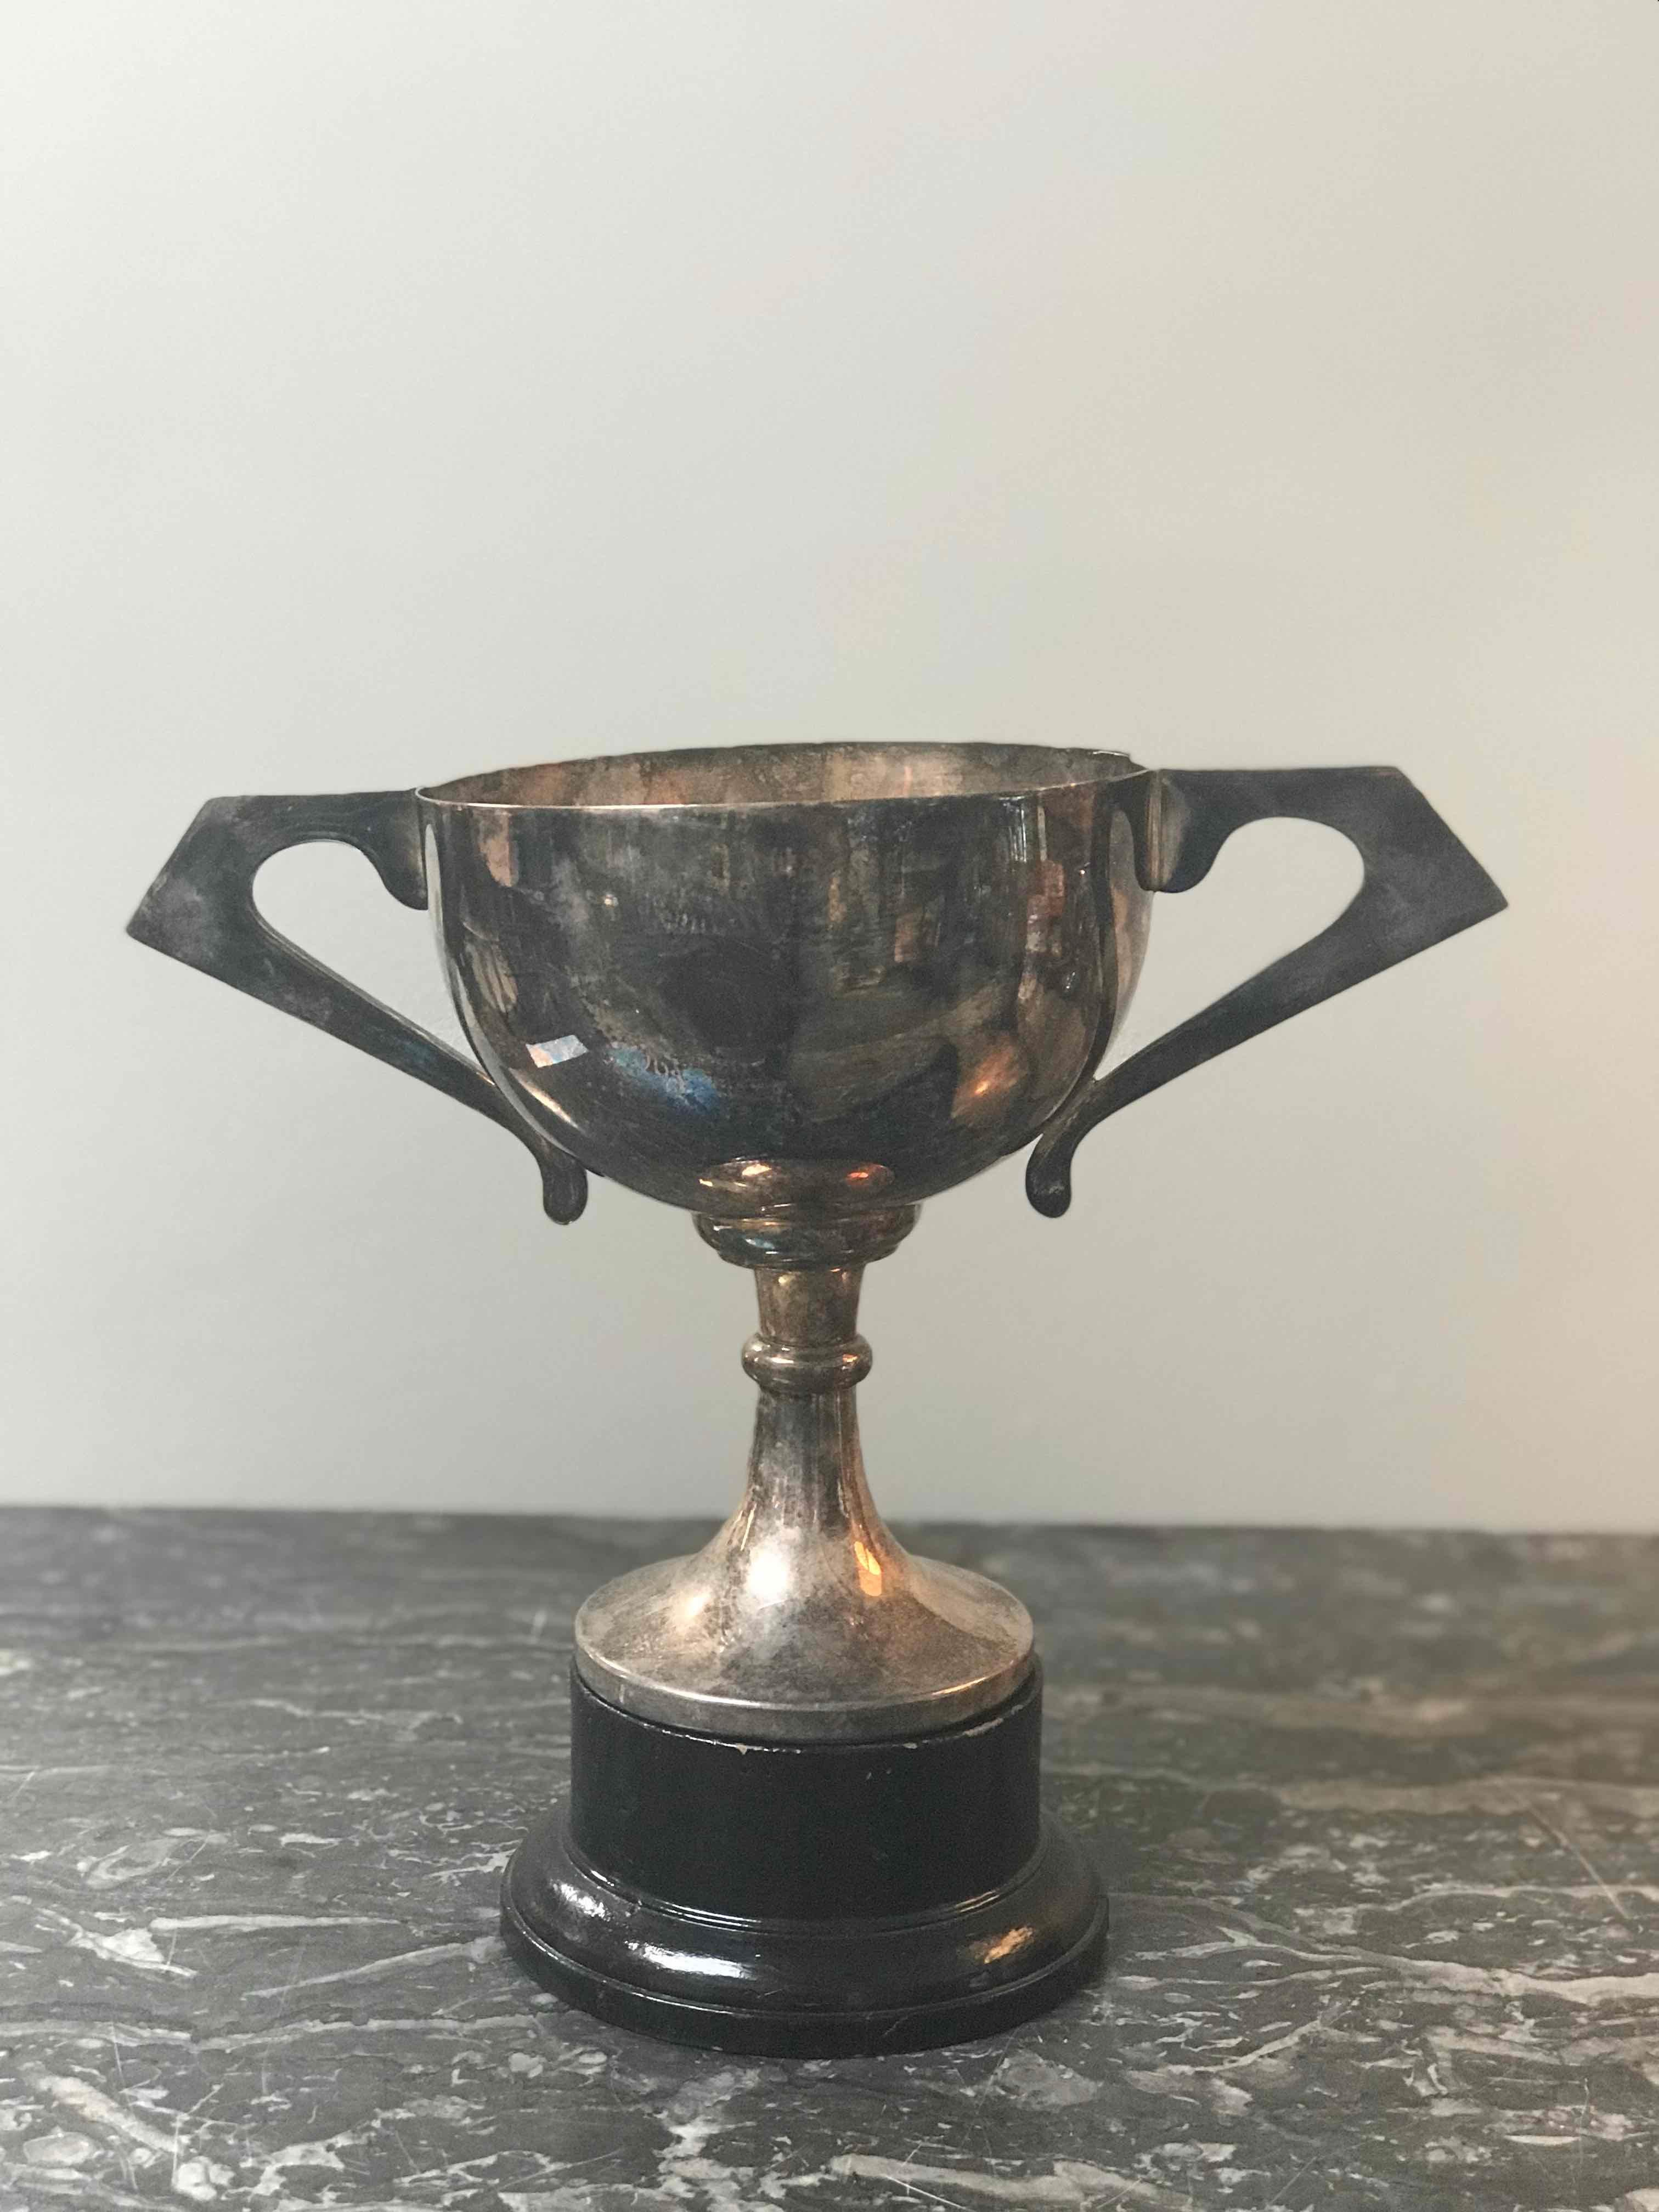 Early 20th century silver-plate trophy with handles on ebonized base. 